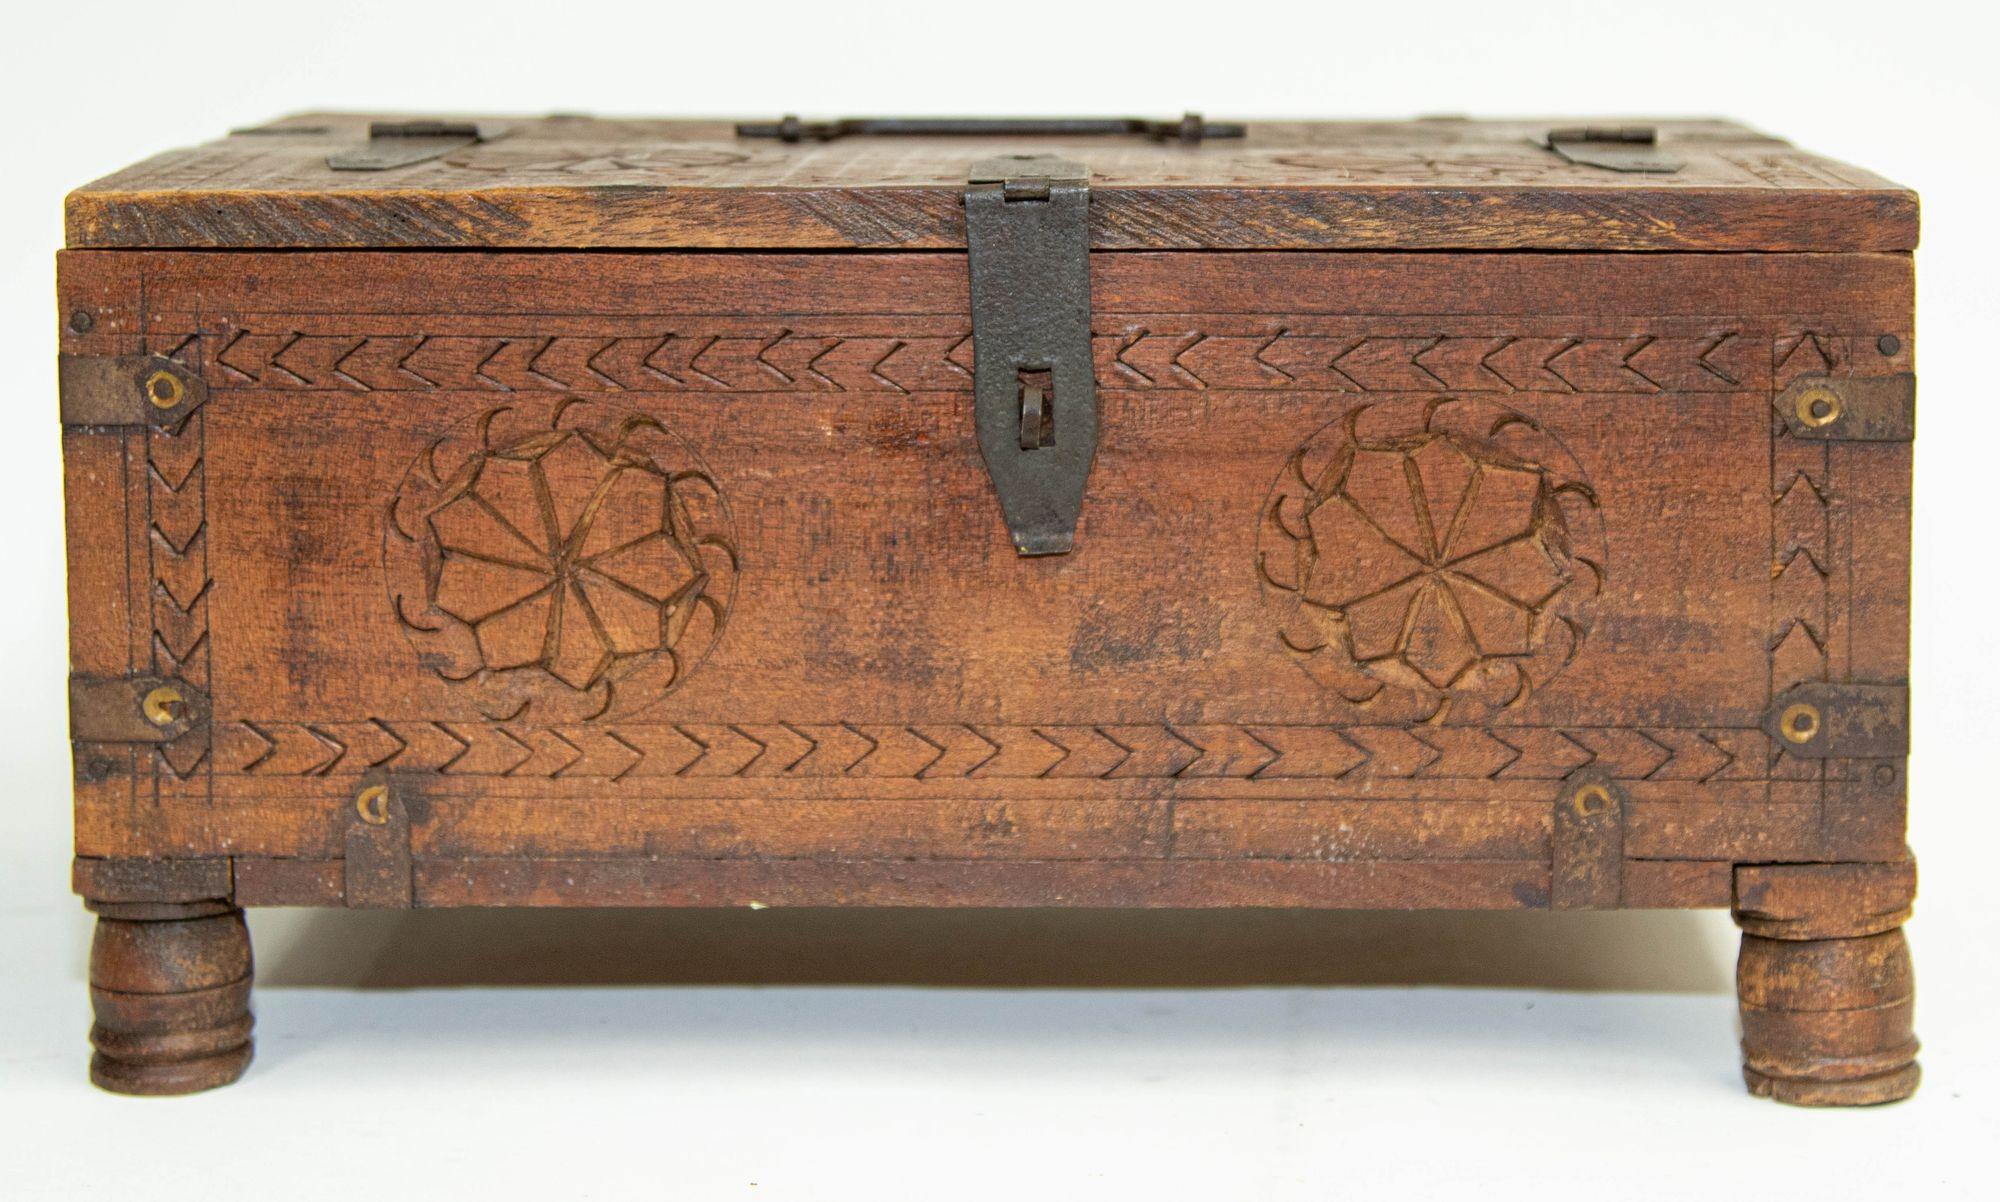 Antique Rajasthani Shekhawati Merchant's Footed Chest Box India 1900's.
Early 20th Century Indian carved wood storage cash footed box used by merchants in their stores and also in every house to store money and jewelry or valuable